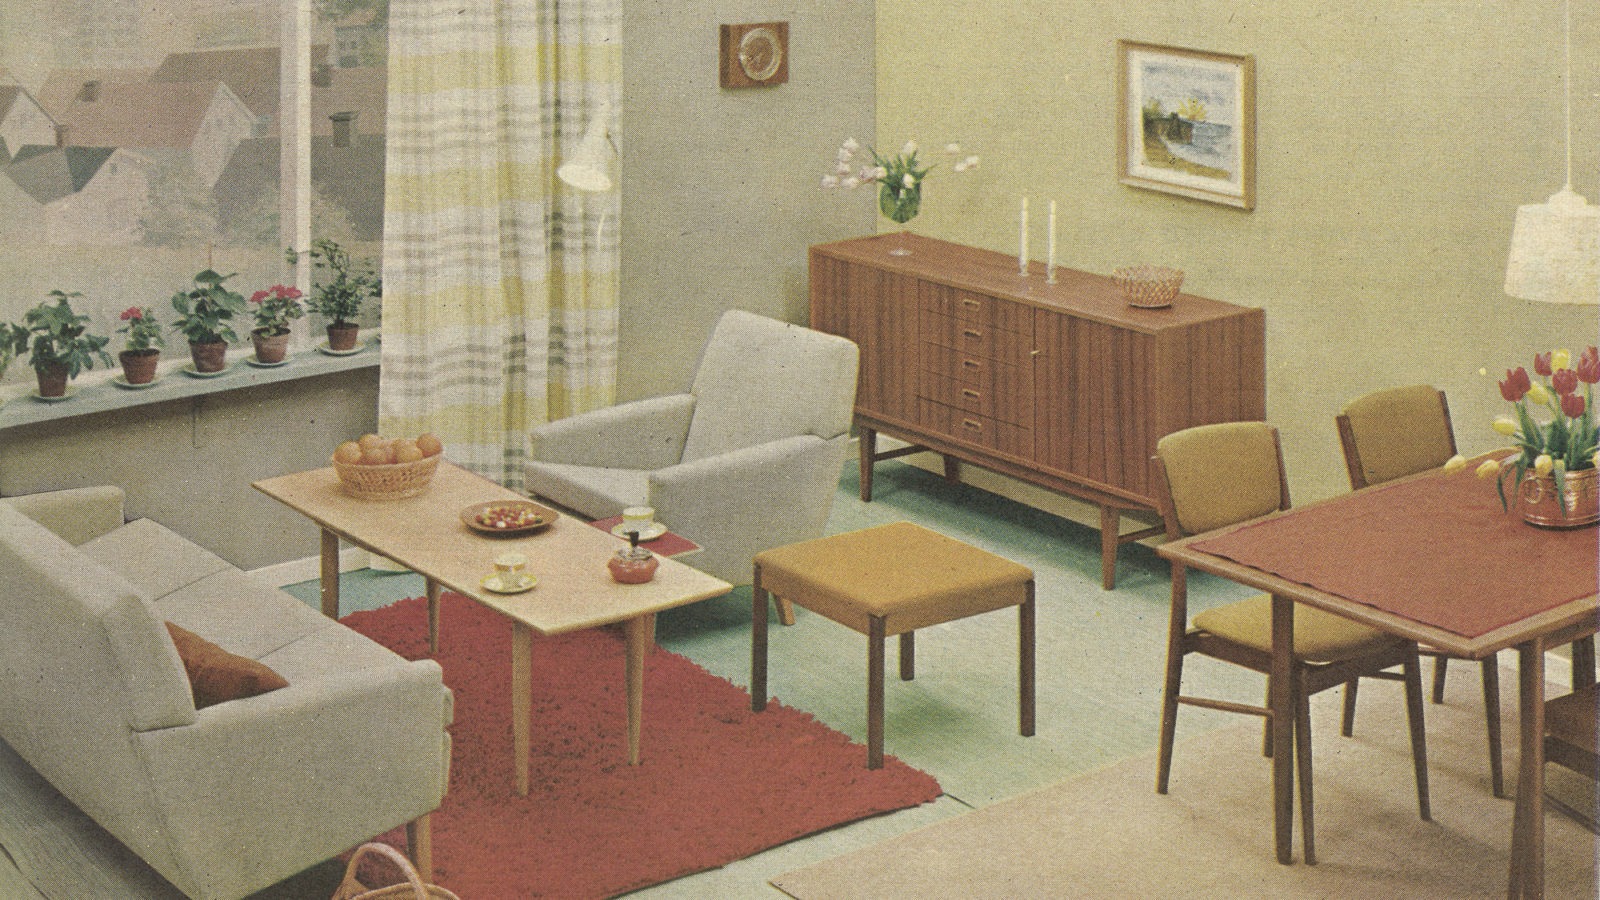 Interior in 1960s style with potted plants in window, red rug, beige sofa group, dining group and sideboard of wood.